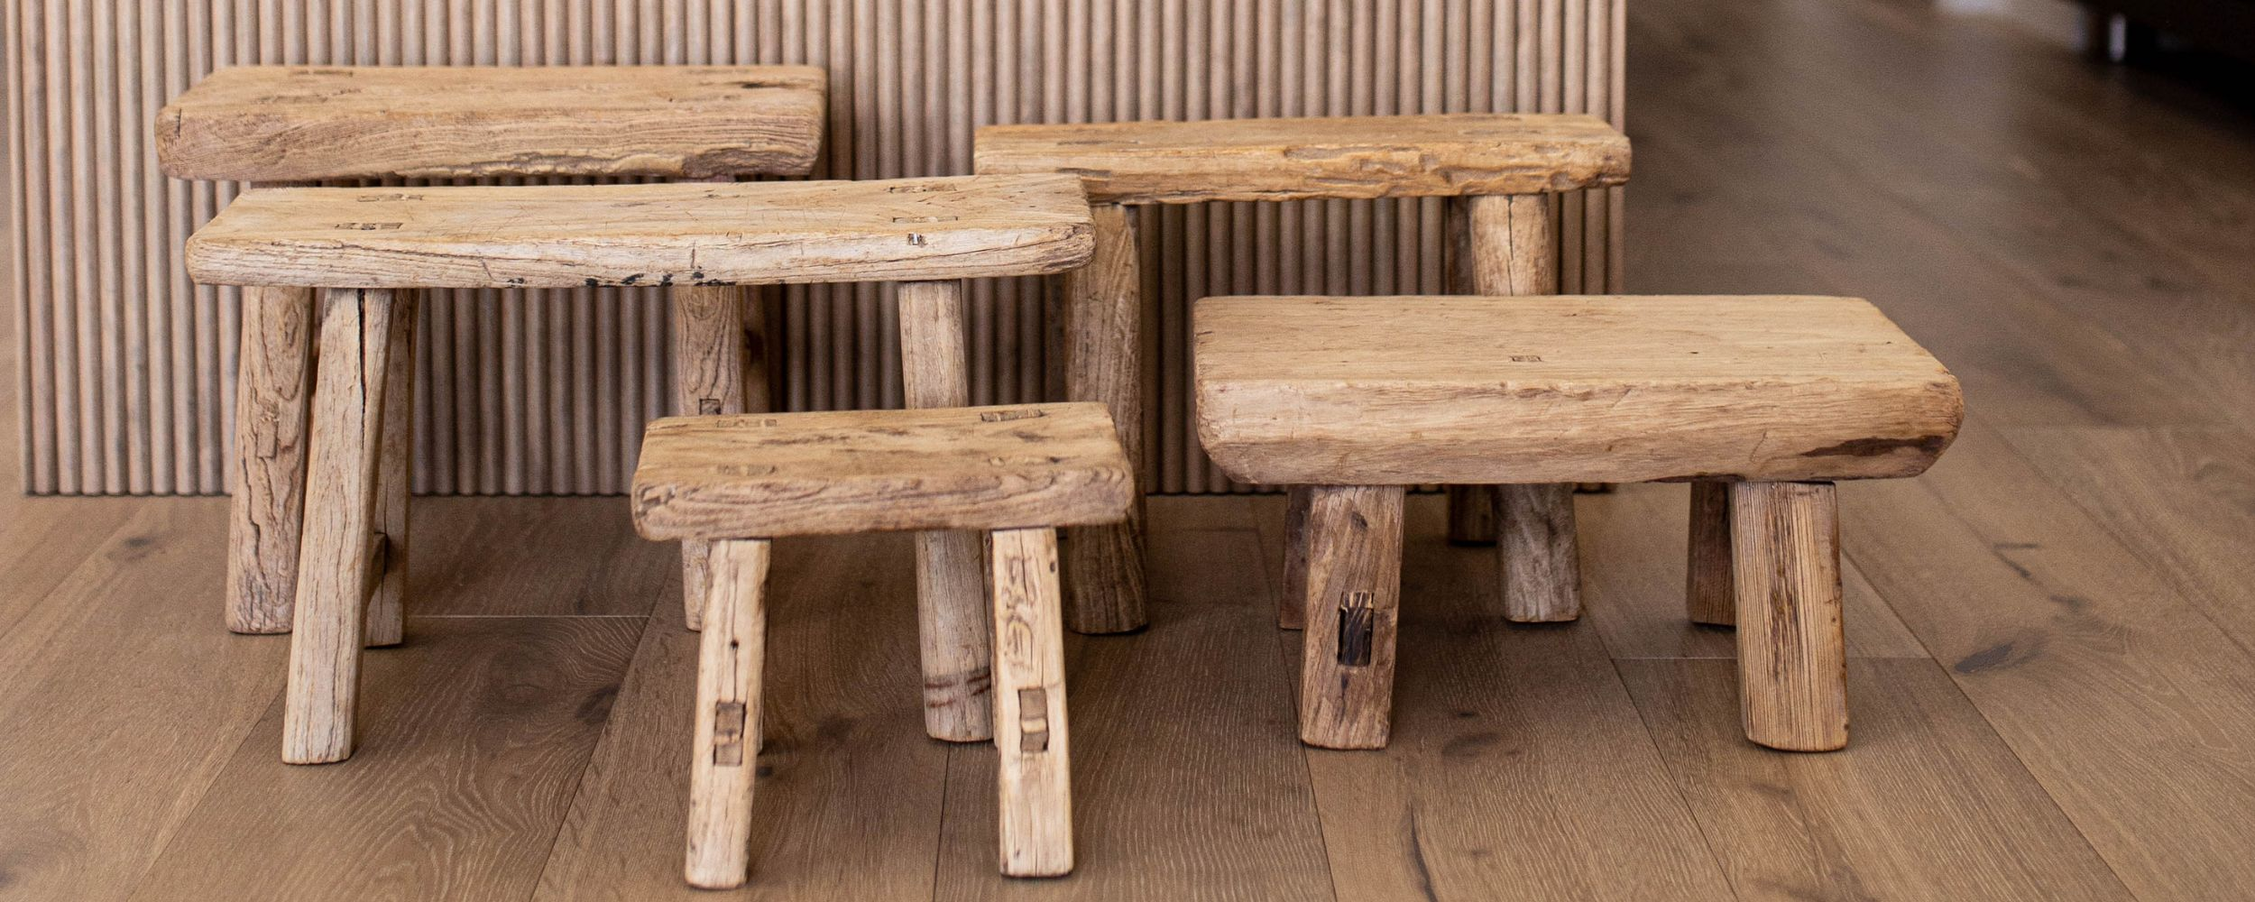 BENCHES & STOOLS